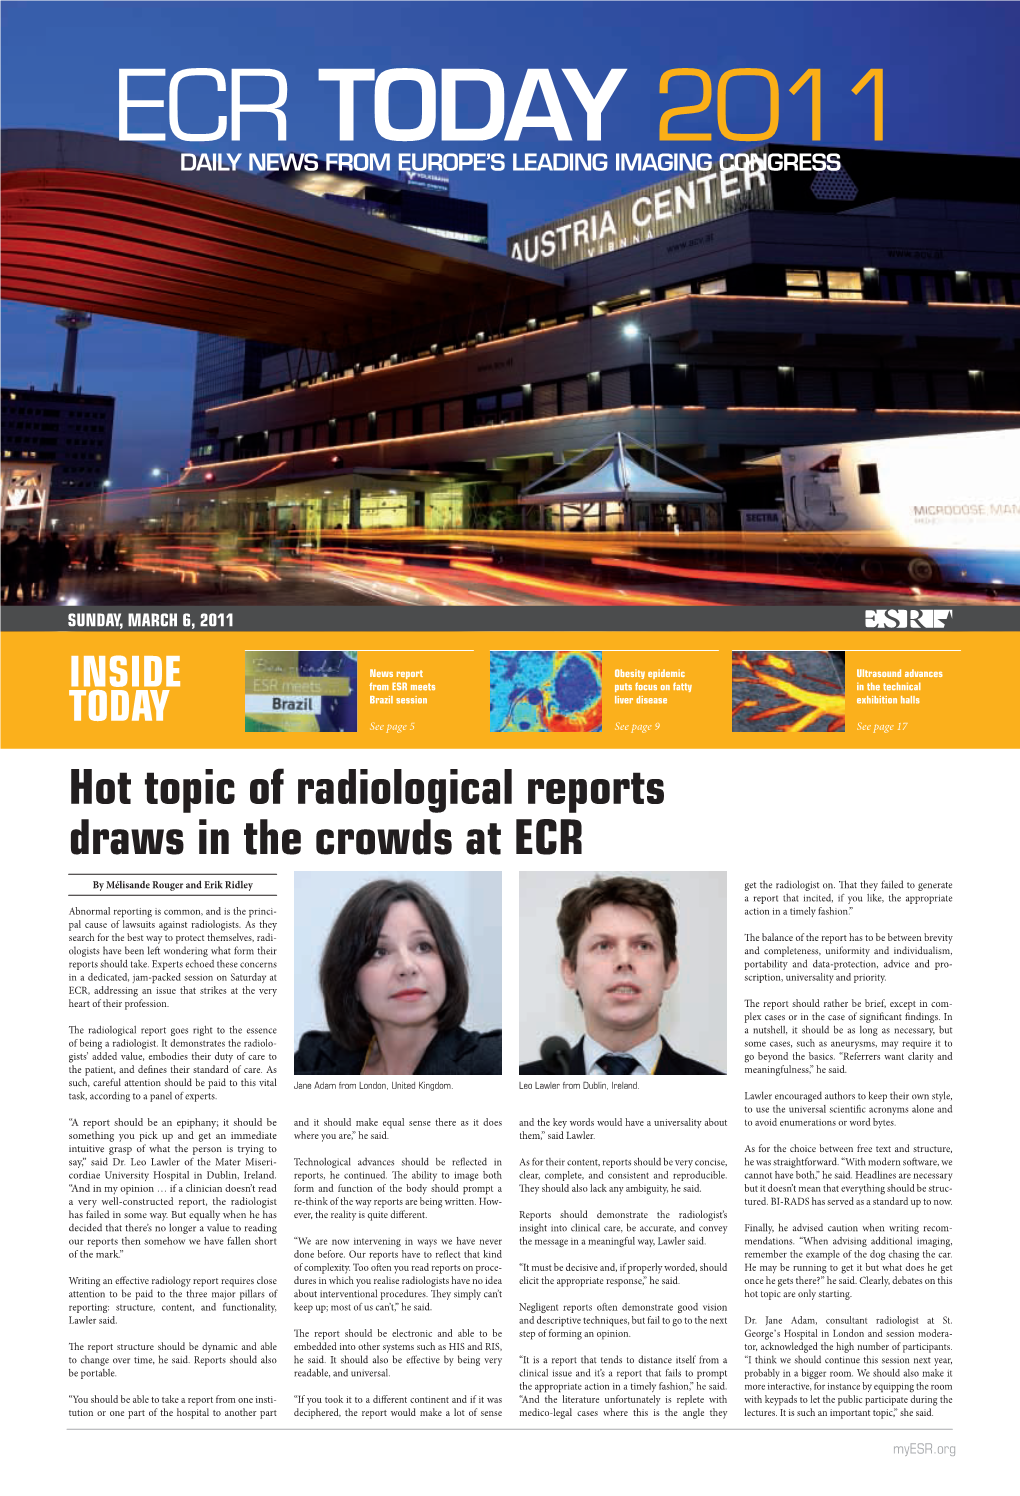 Hot Topic of Radiological Reports Draws in the Crowds at ECR